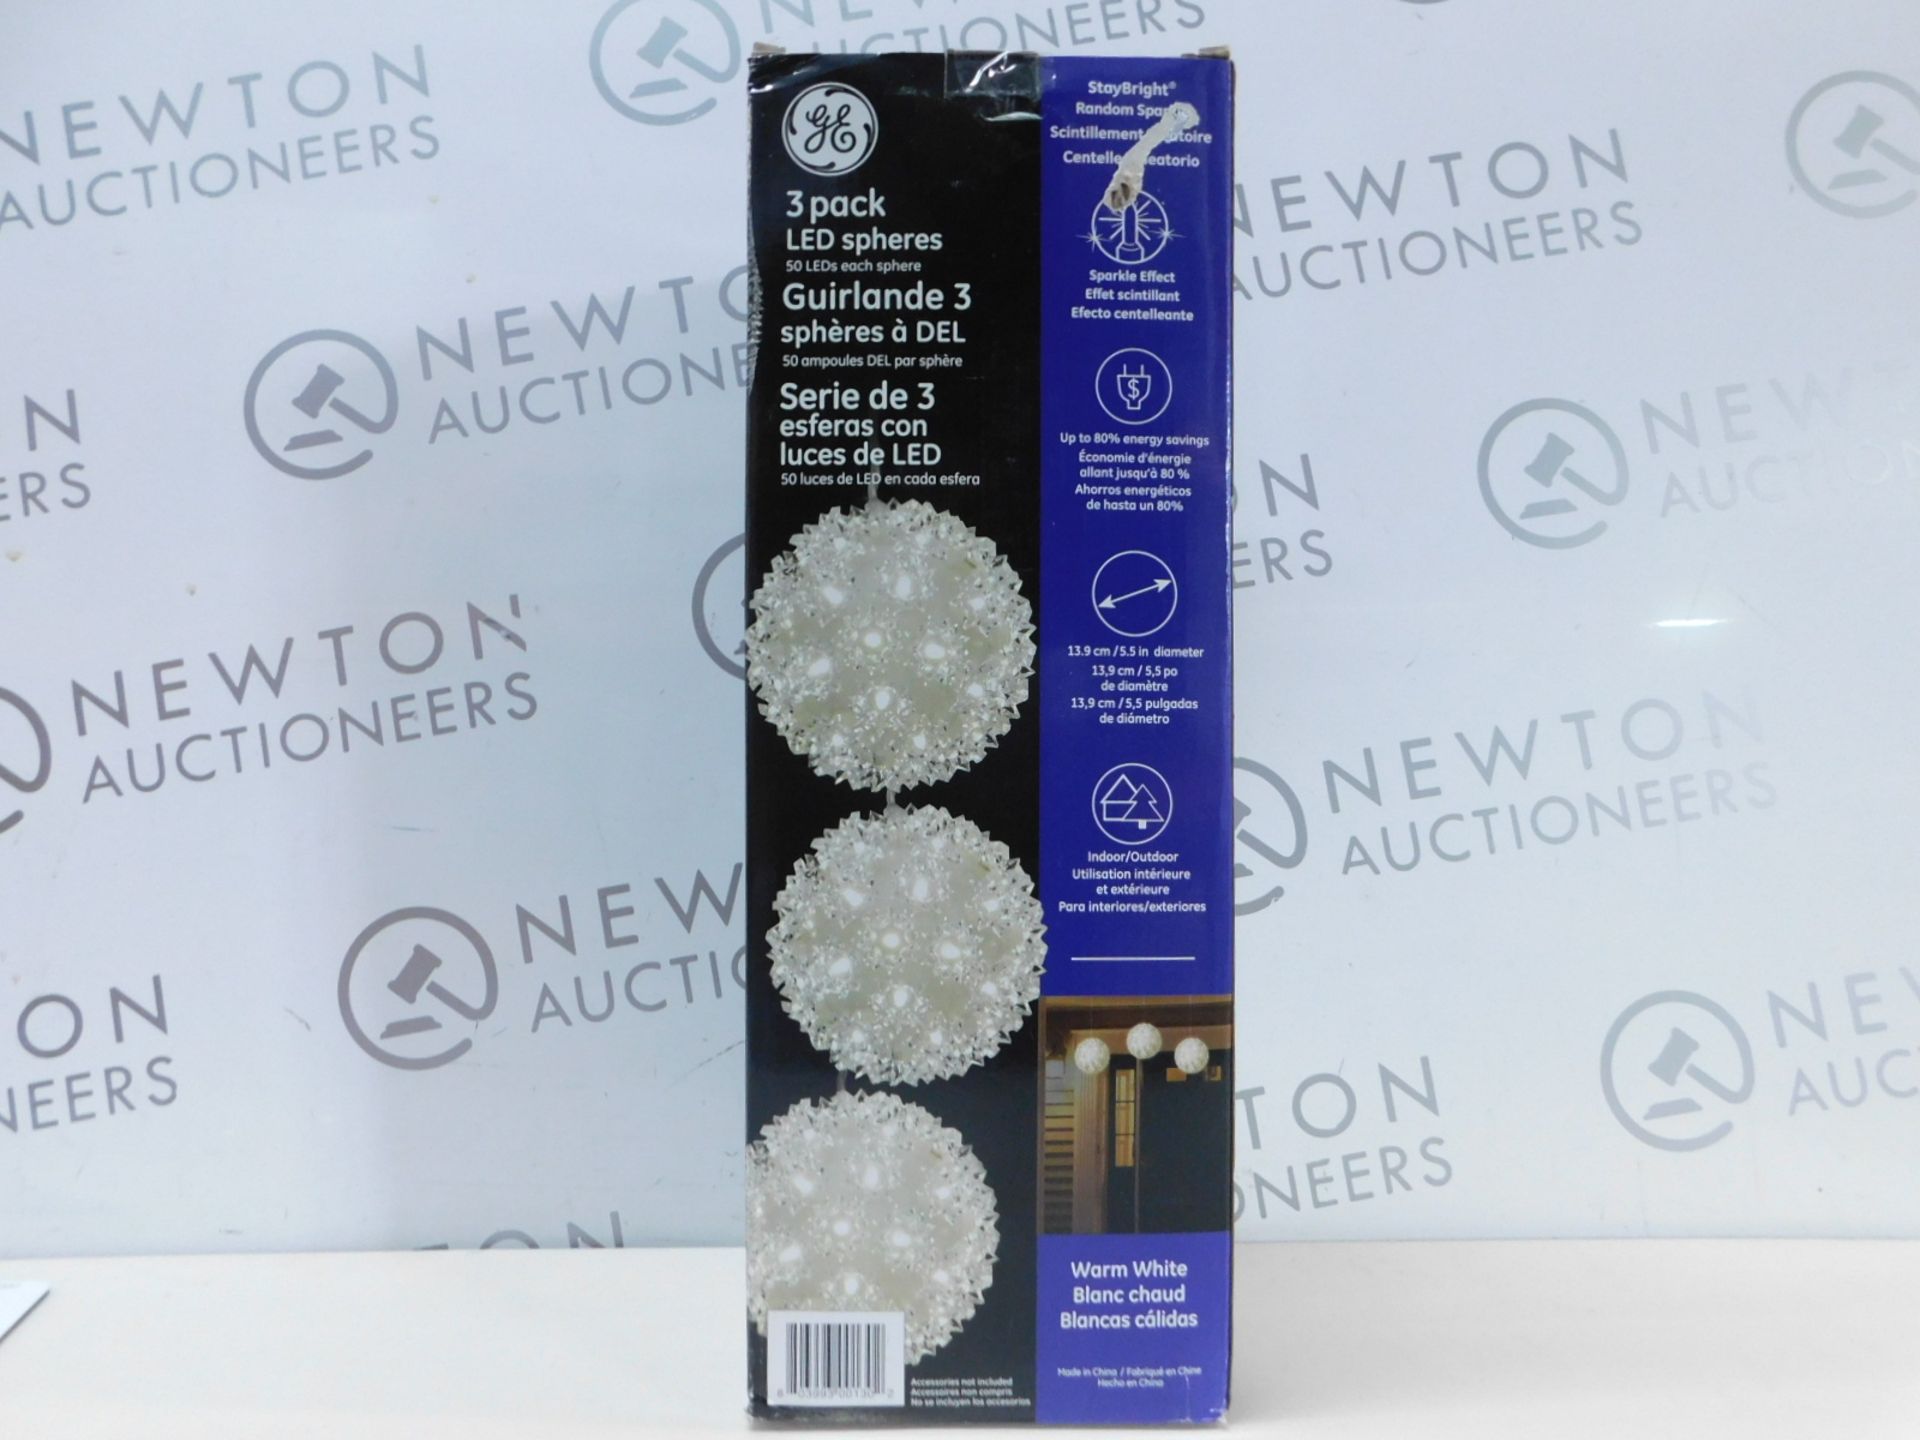 1 BRAND NEW BOXED 3 PACK STAYBRIGHT SUPER BRIGHT LED SPHERES RRP Â£34.99